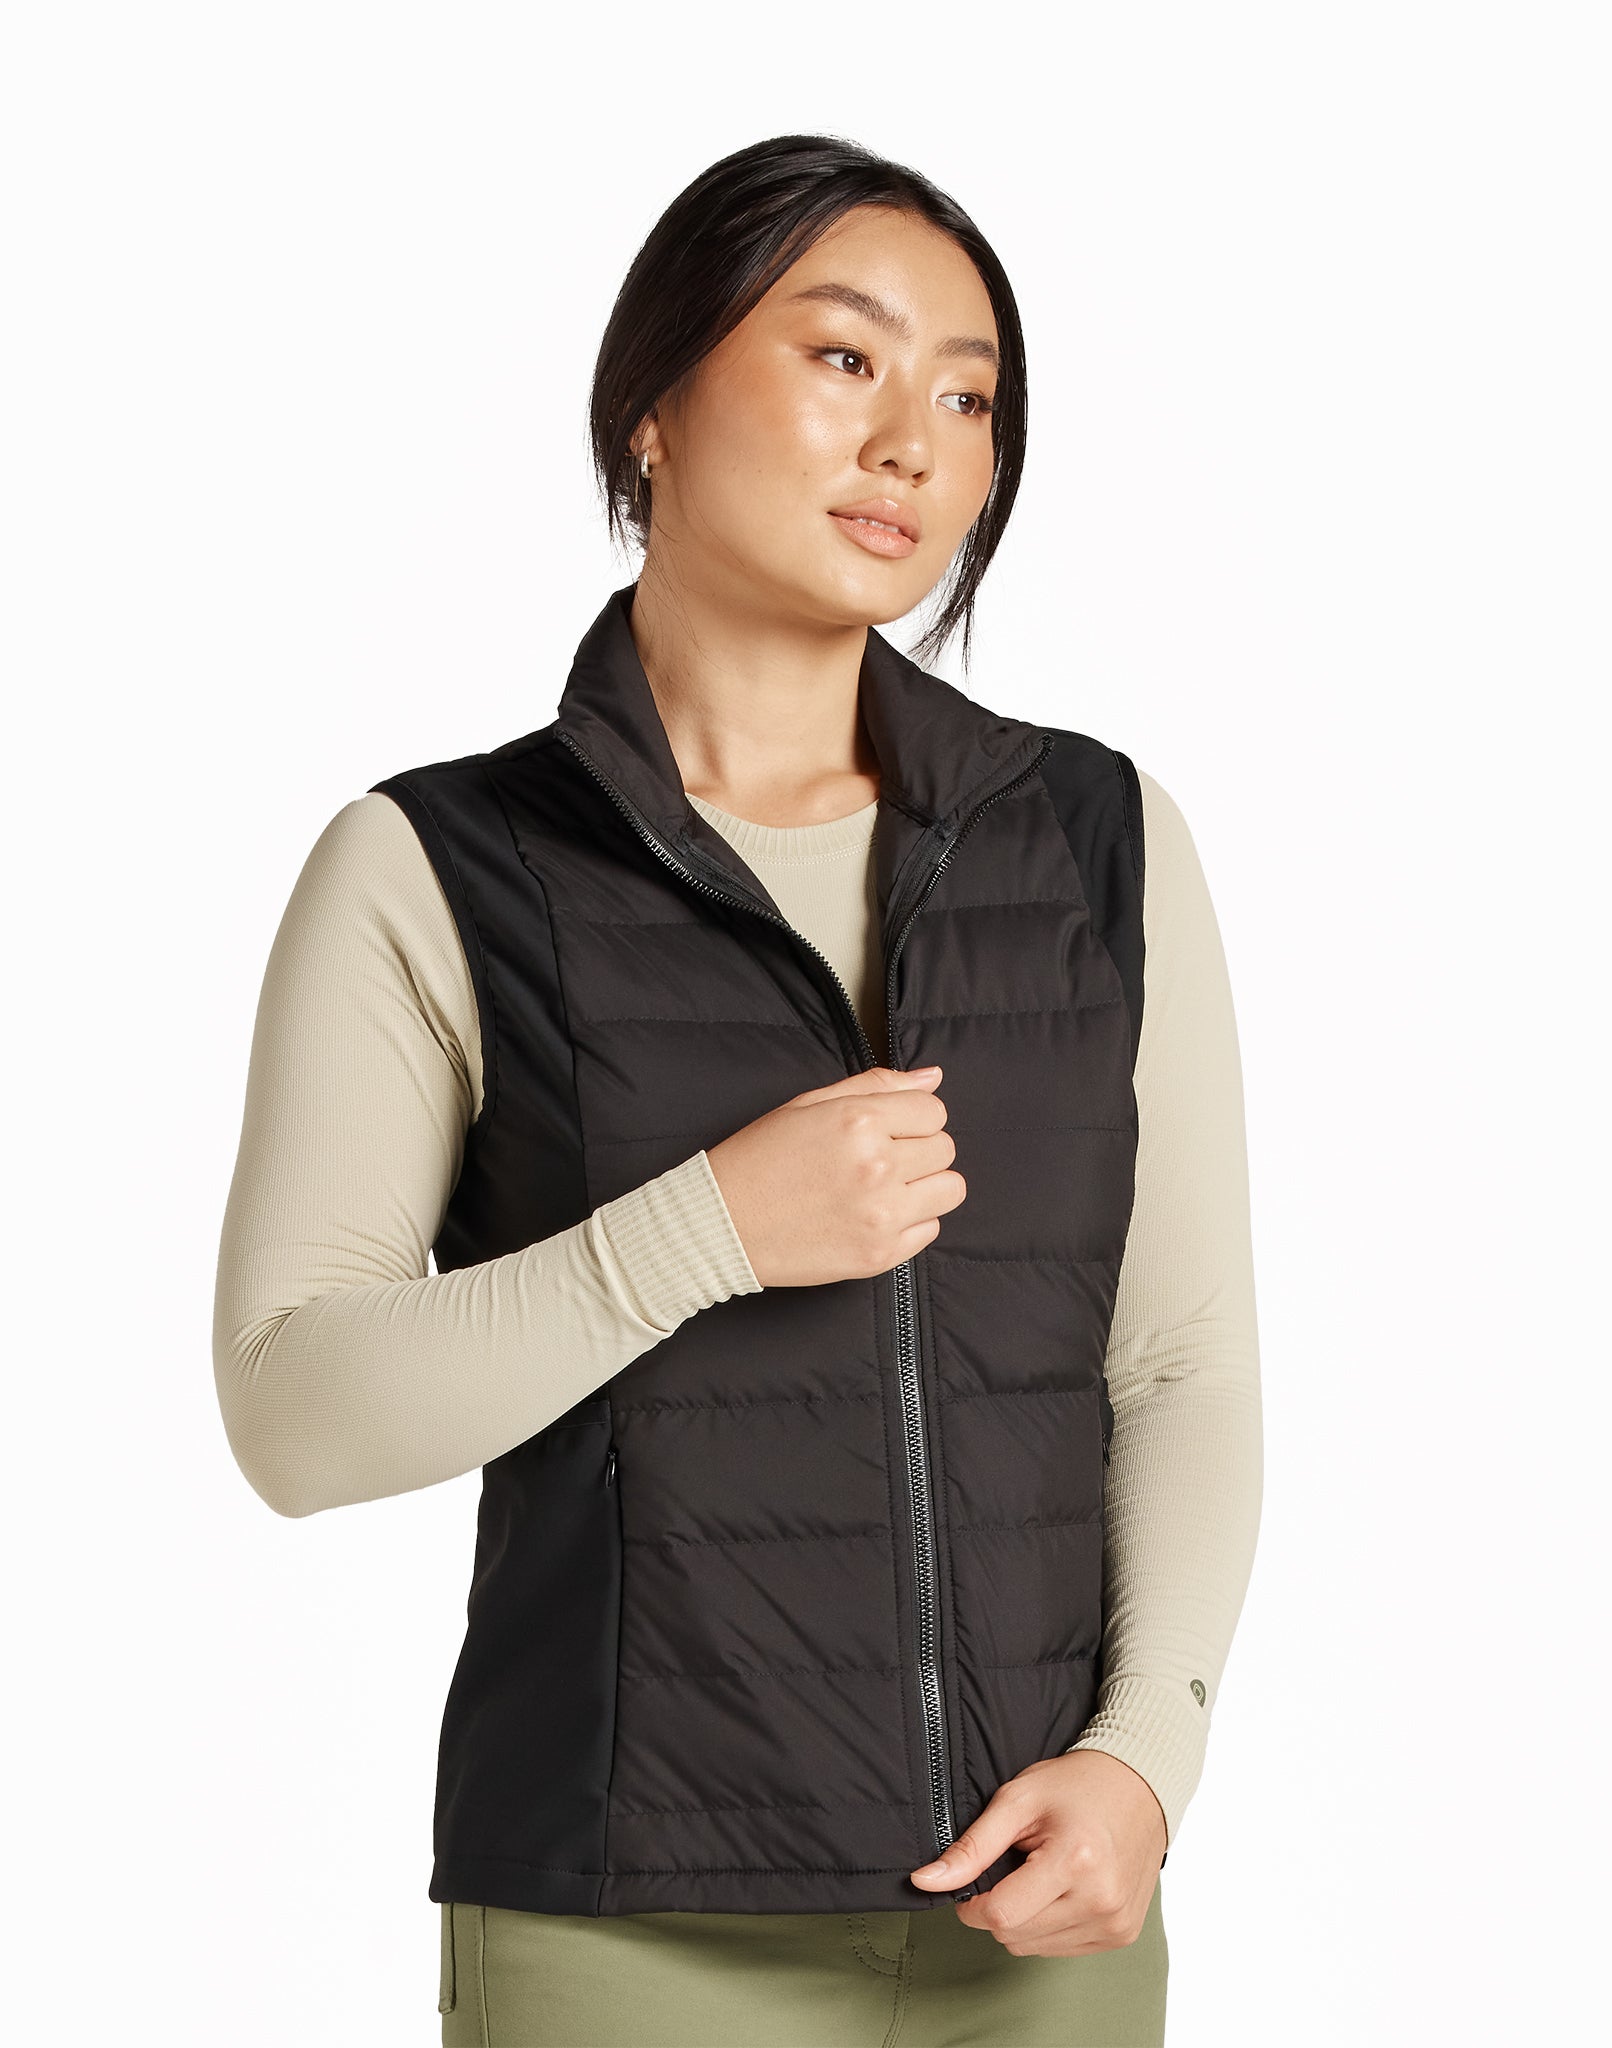 The Puffer Vest